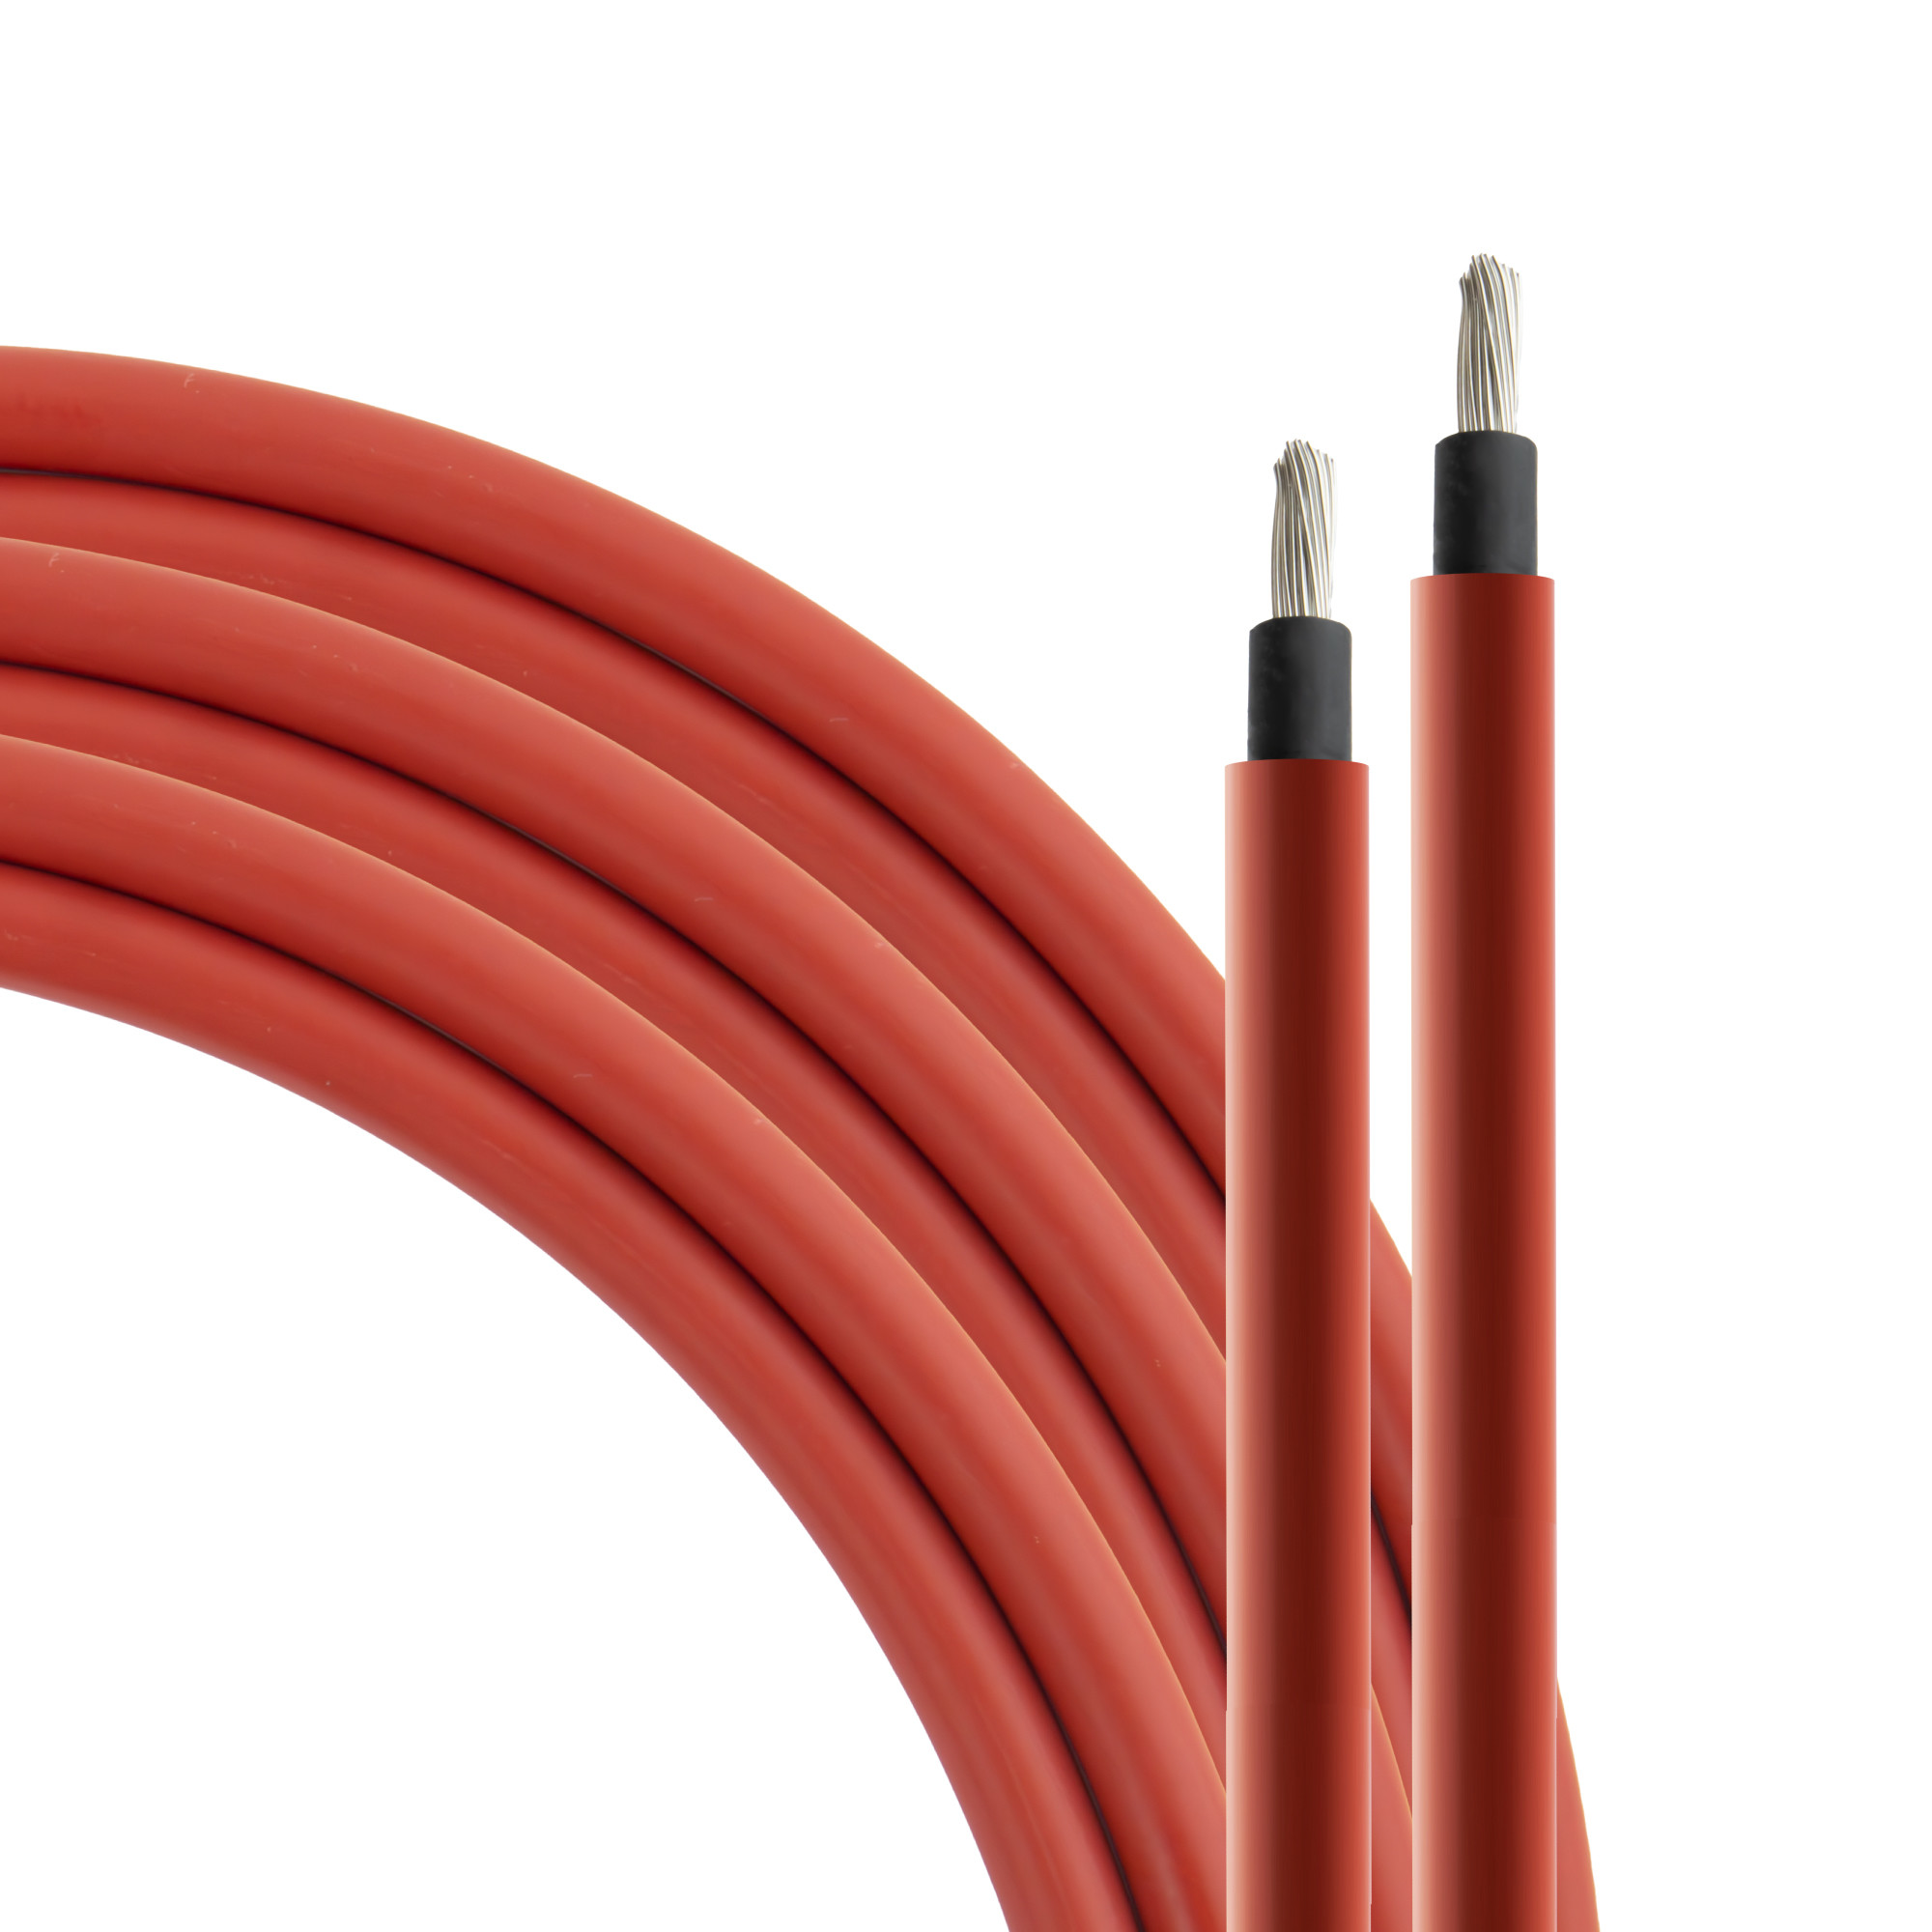 Solar cable 6 mm² red - 25m